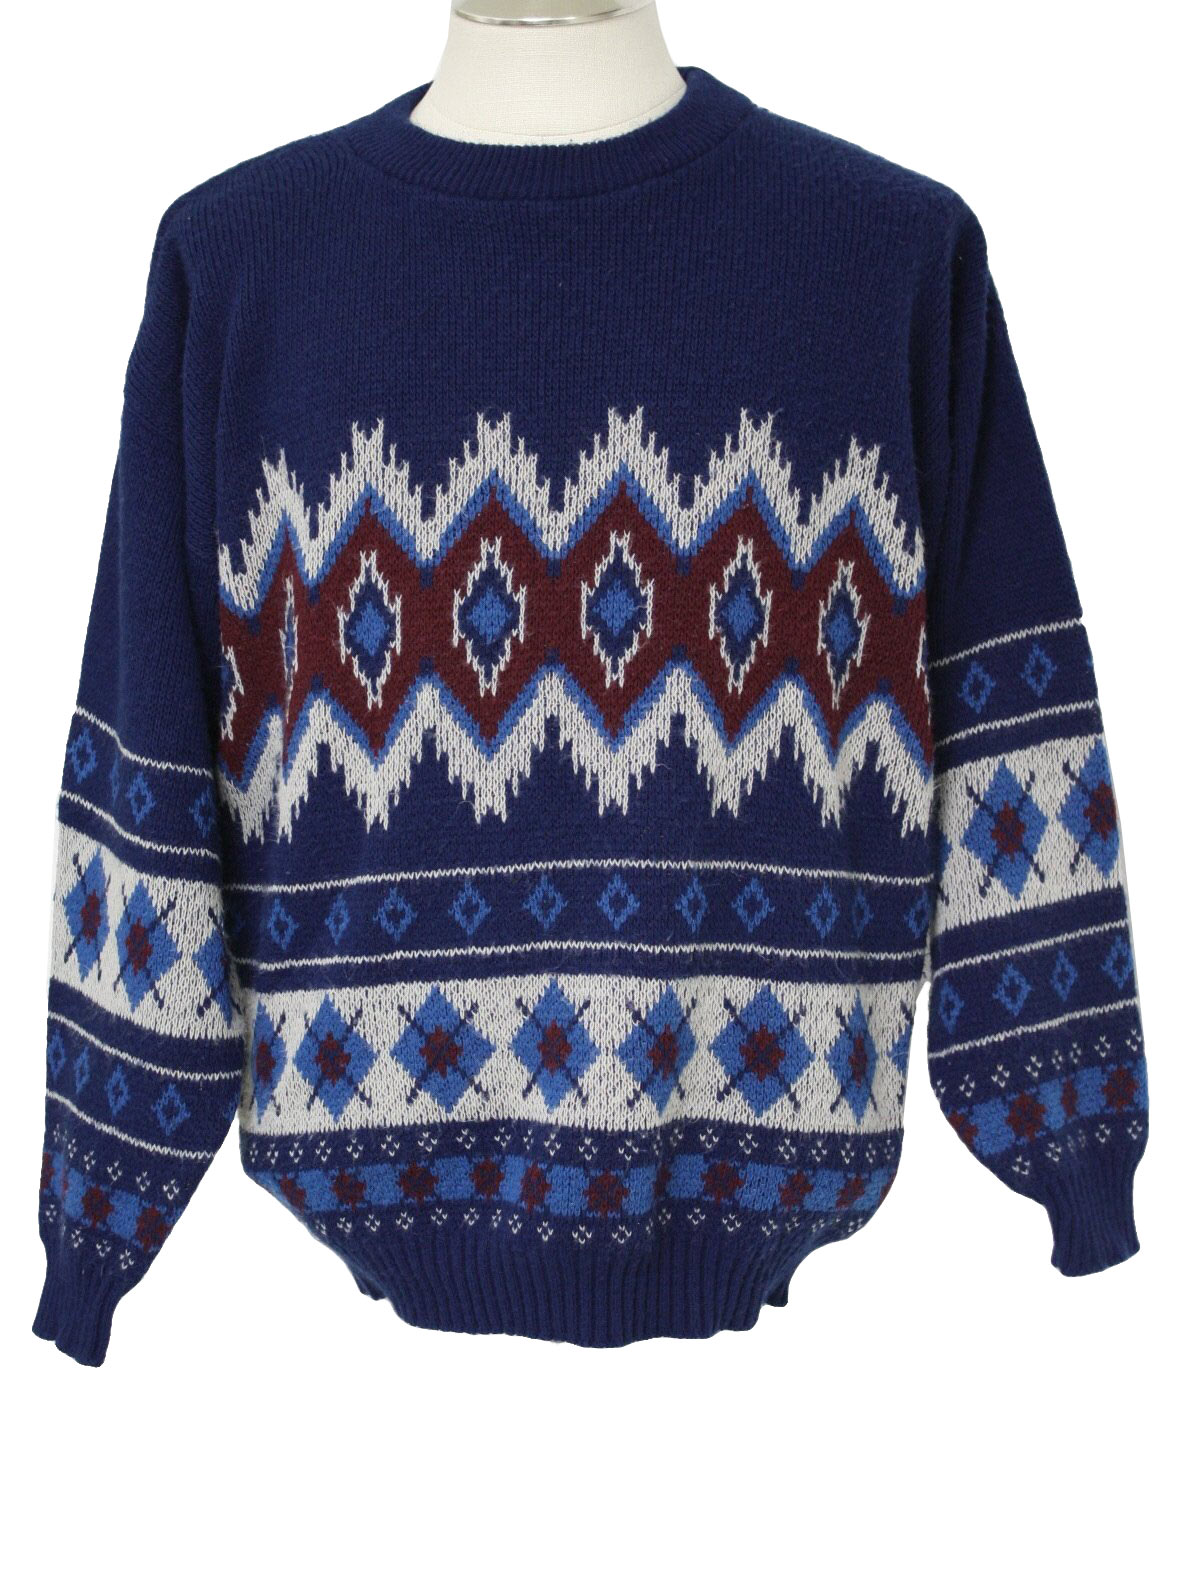 1980's Retro Sweater: 80s -Towncraft- Mens navy, maroon, white, and ...